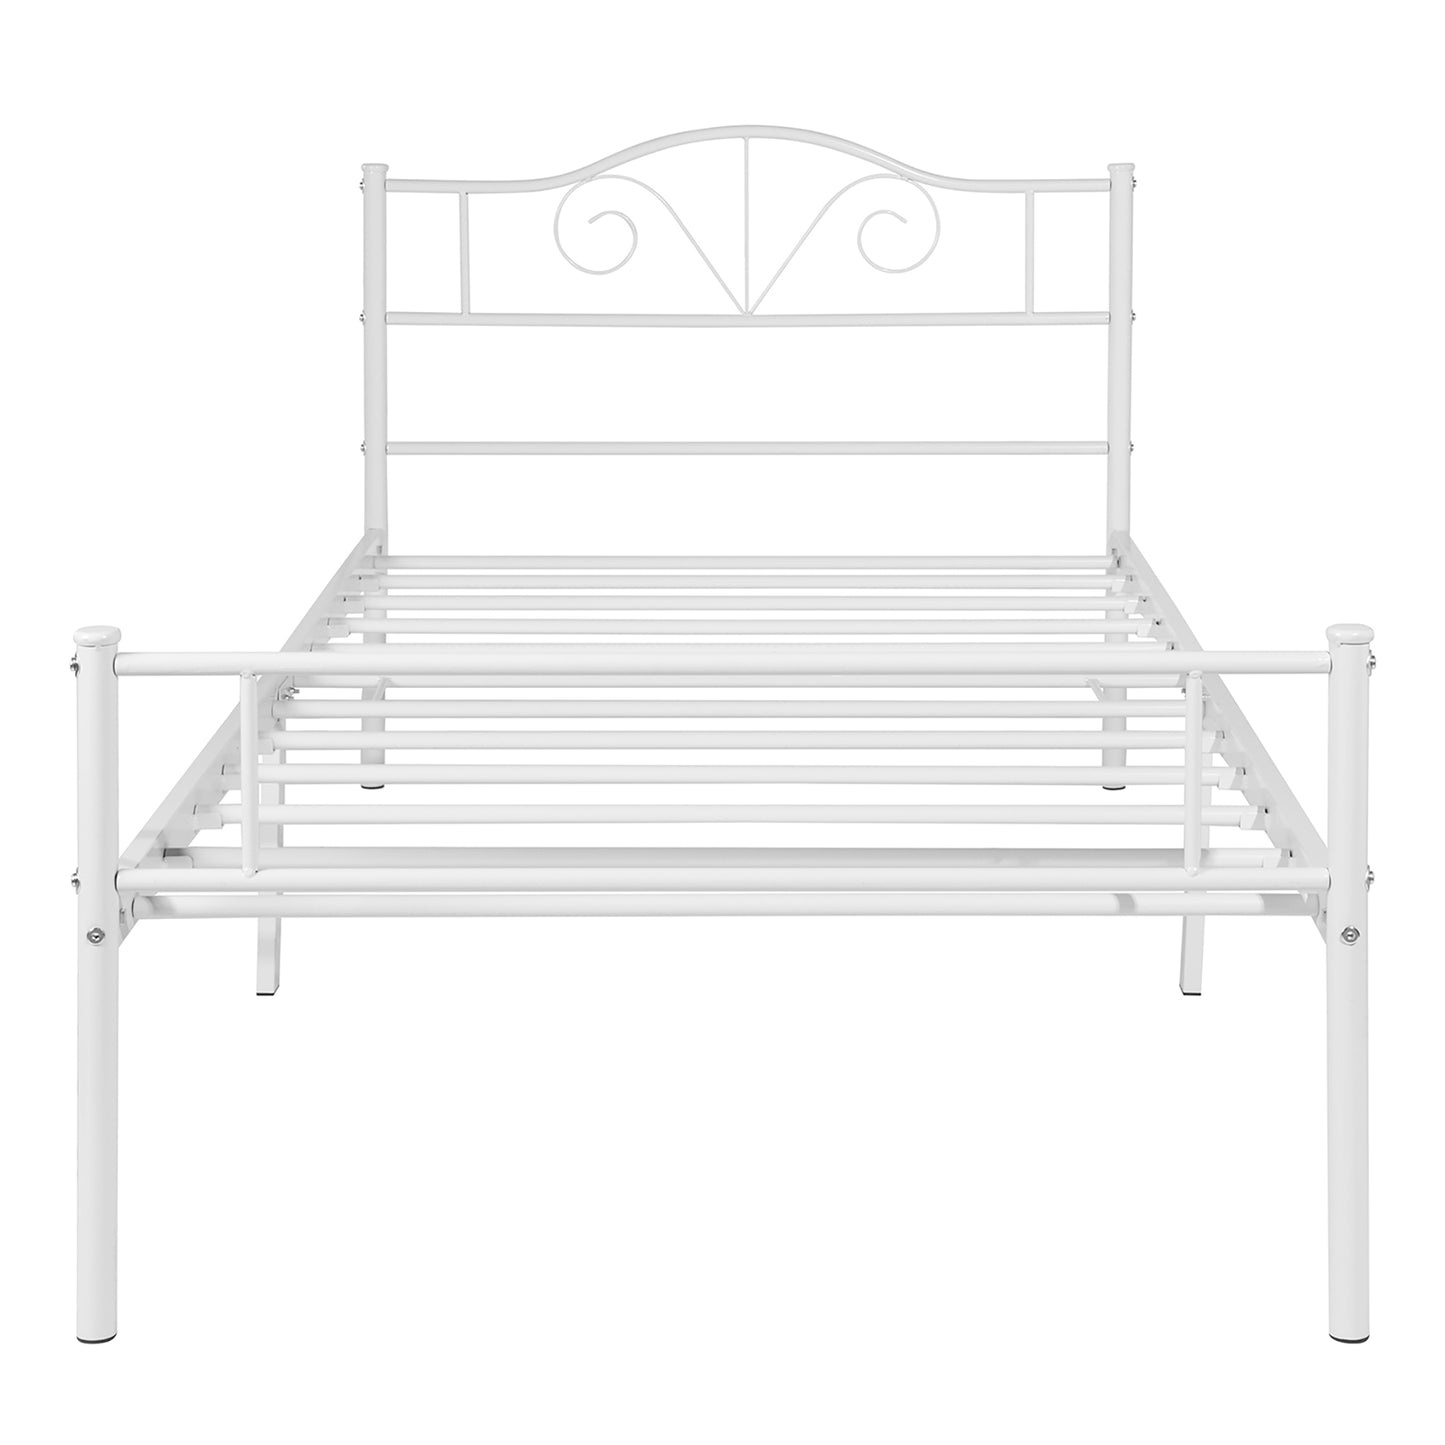 LT twin size single bed frame in white color for adult and children used in bedroom or dormitory with large storage space under the bed